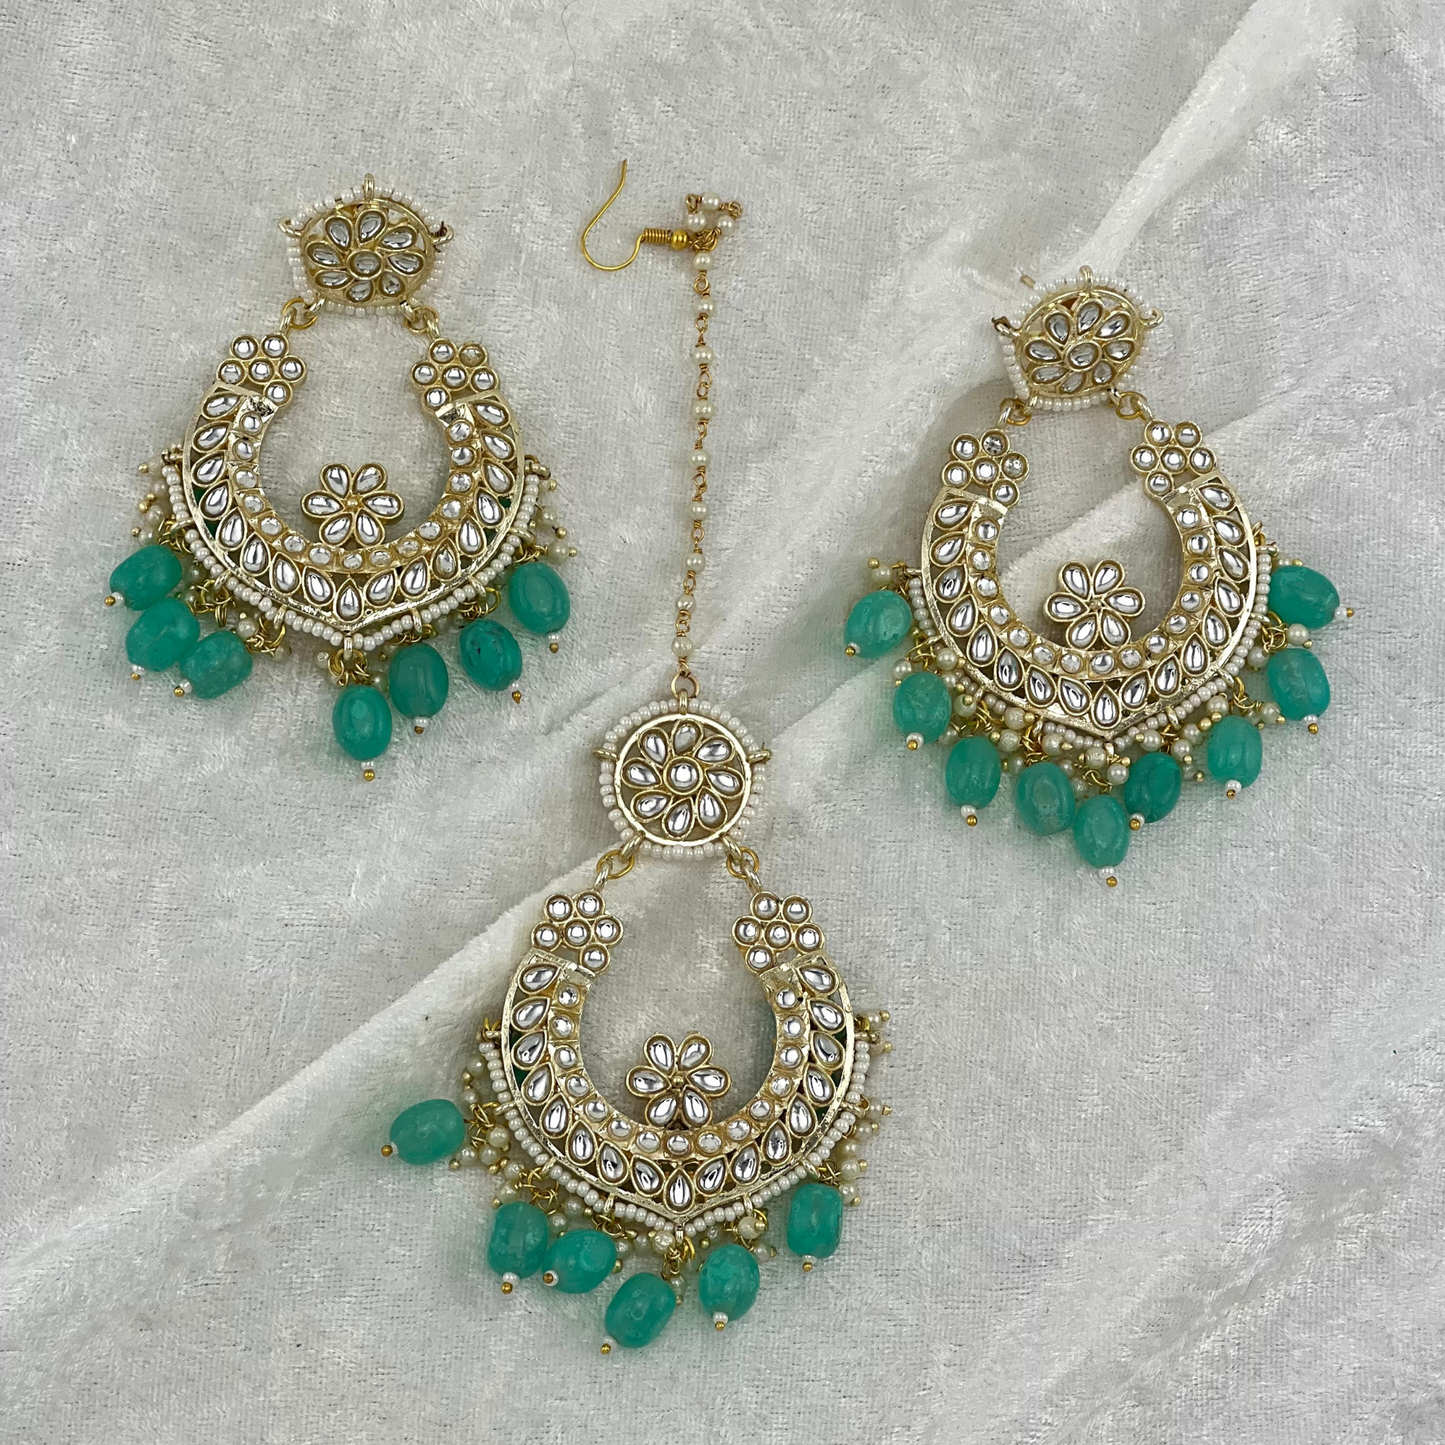 Tikka & Earring Set in turquoise with high quality beads, peals and stones